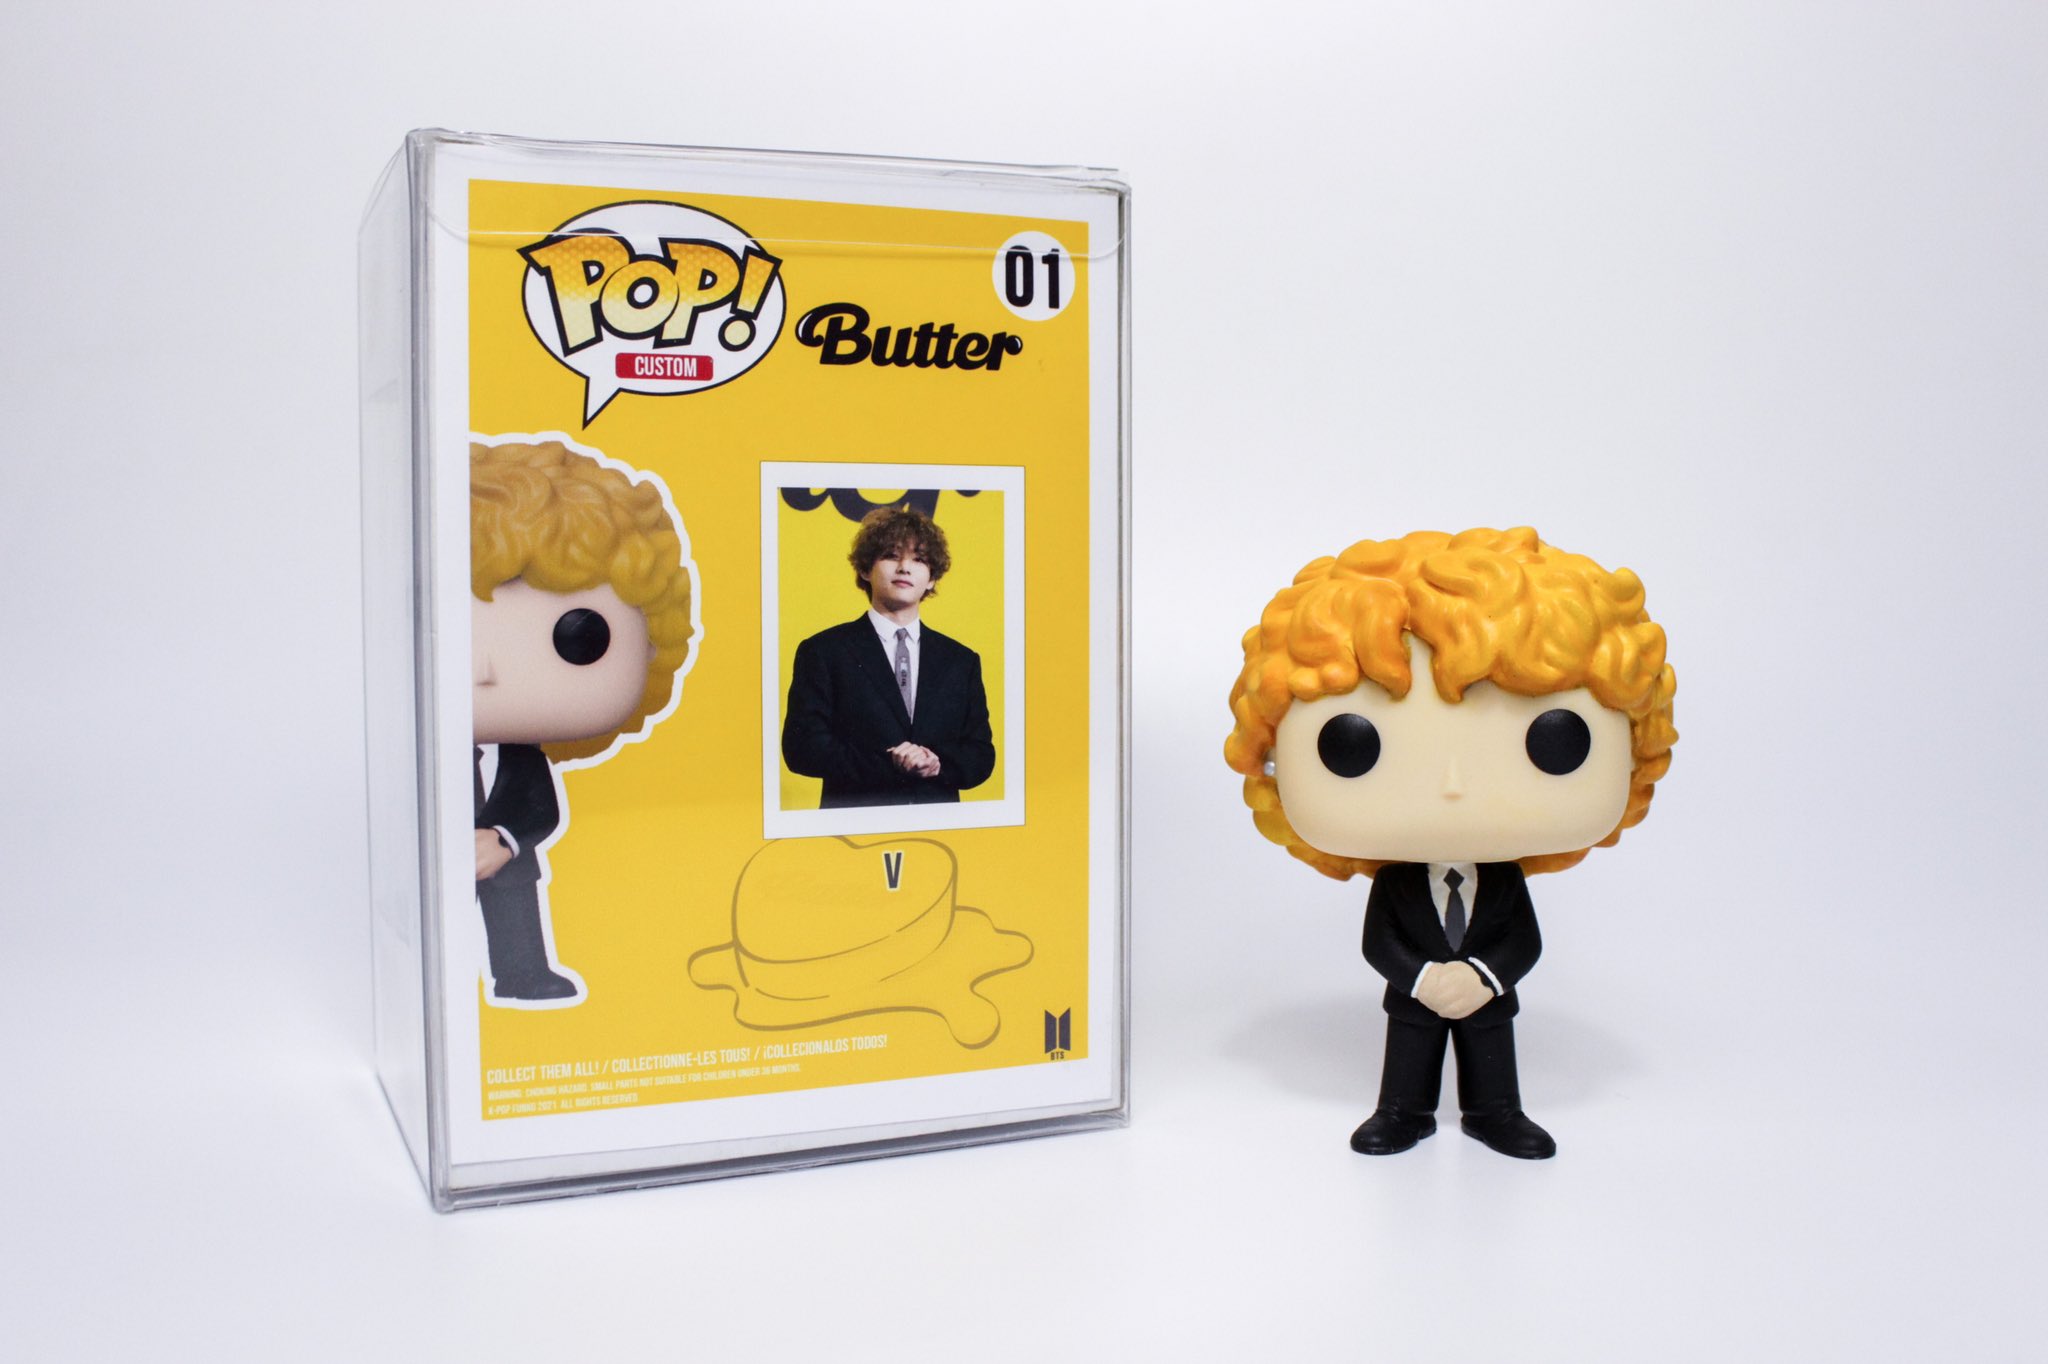 Tarmfunktion Reduktion beruset Kpopfunko on Twitter: "Attention fellow Armys!!💜 Introducing our  customized 'V' Butter version. Get this limited cool shade, stunner 'V'  Butter Version Funko Pop today! DM for price :) #bts #BTSARMY #BTSBUTTER  #BTS_Butter #